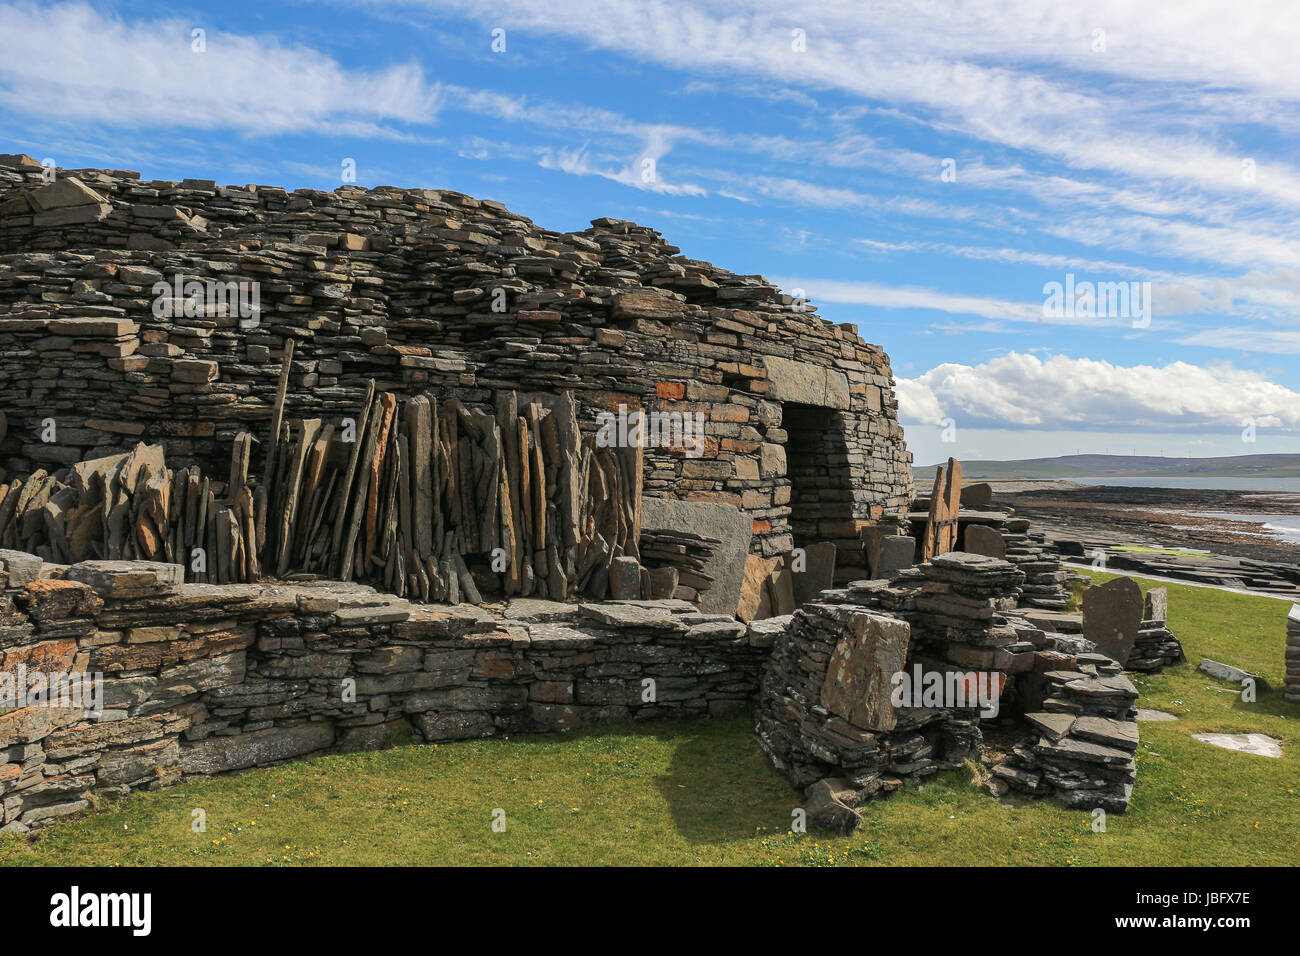 The Iron Age Midhowe Broch on Rousay Island, Orkney, was construc-ted over 2000 years ago from huge sandstone slabs and is one of the best preserved . Stock Photo